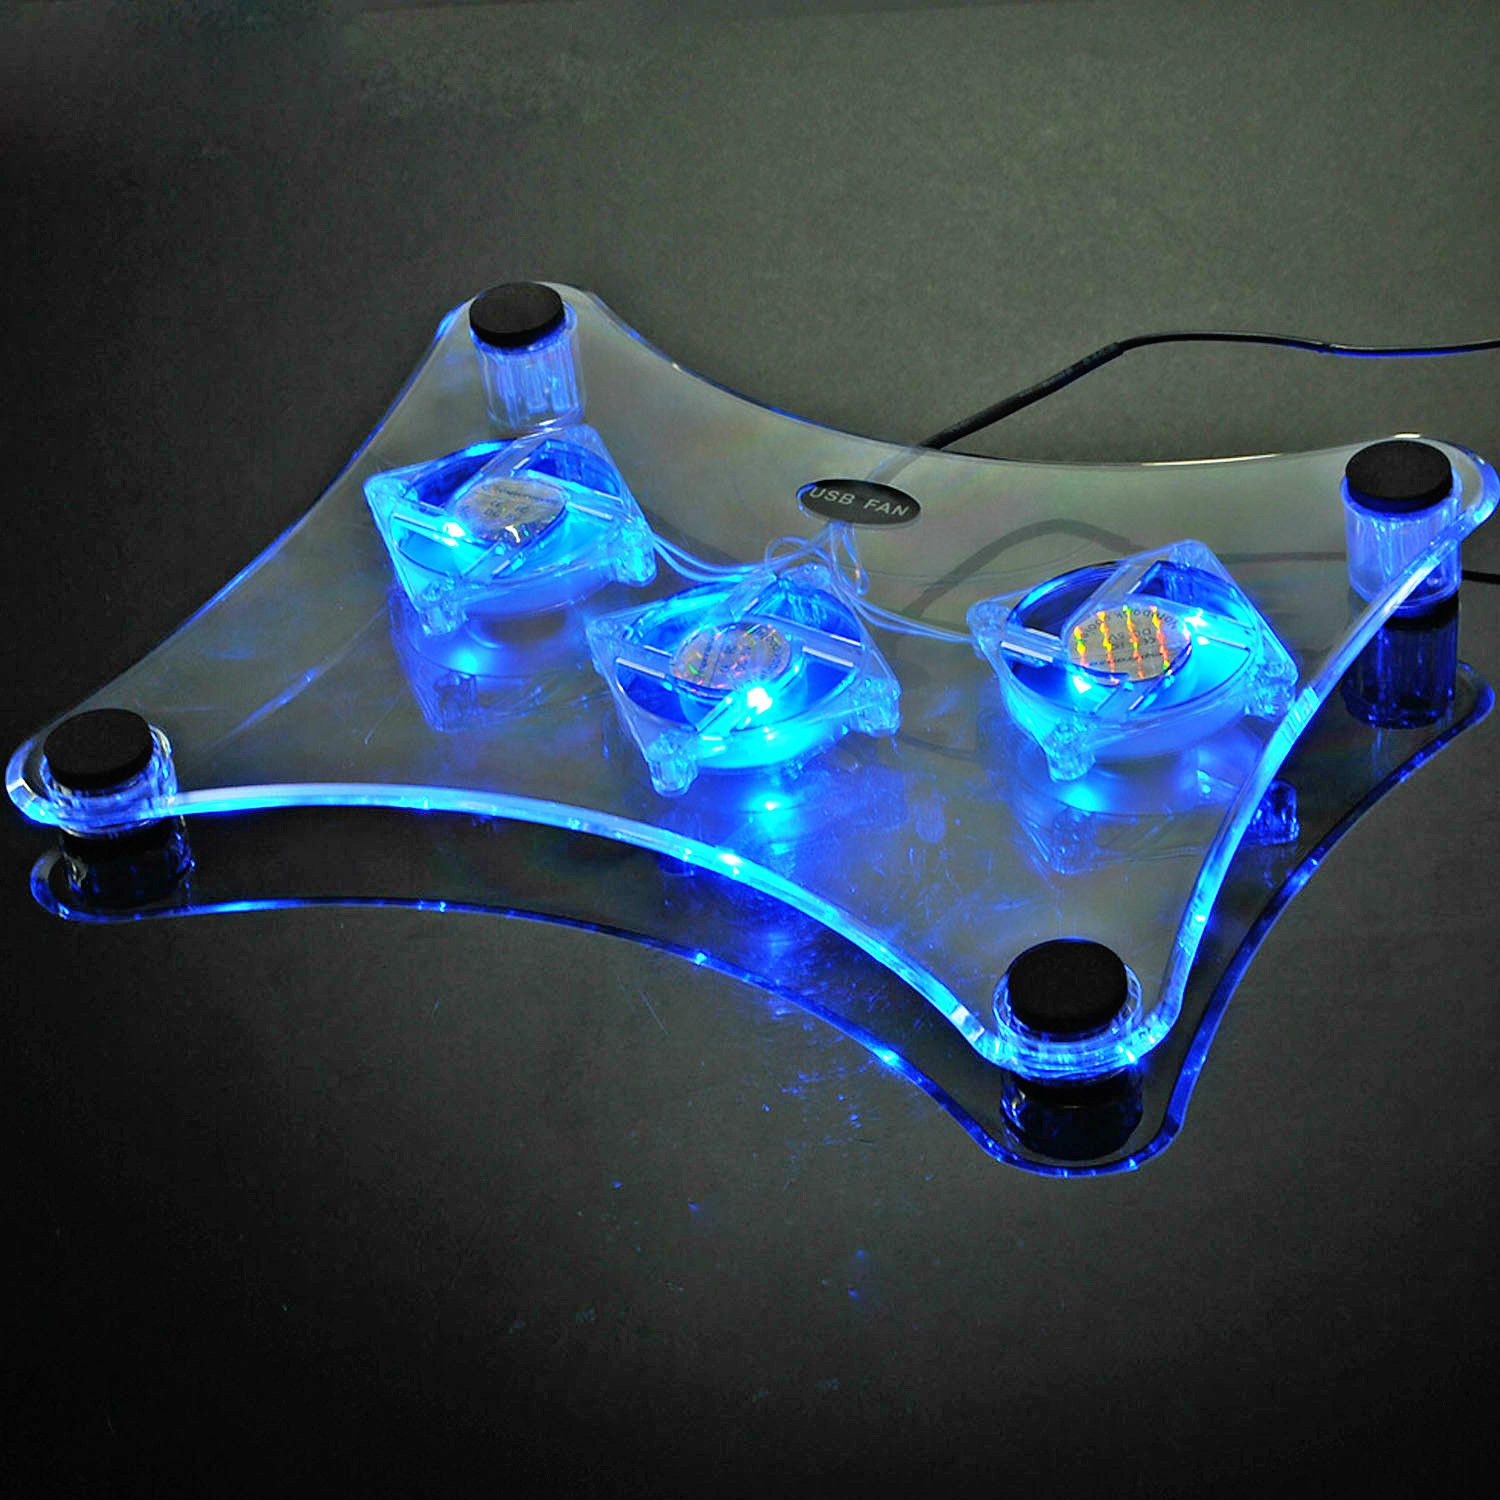 Fosmon usb cooling game pad 3 fan blue led for ps4 ps3 xbox wii u pc laptop machine